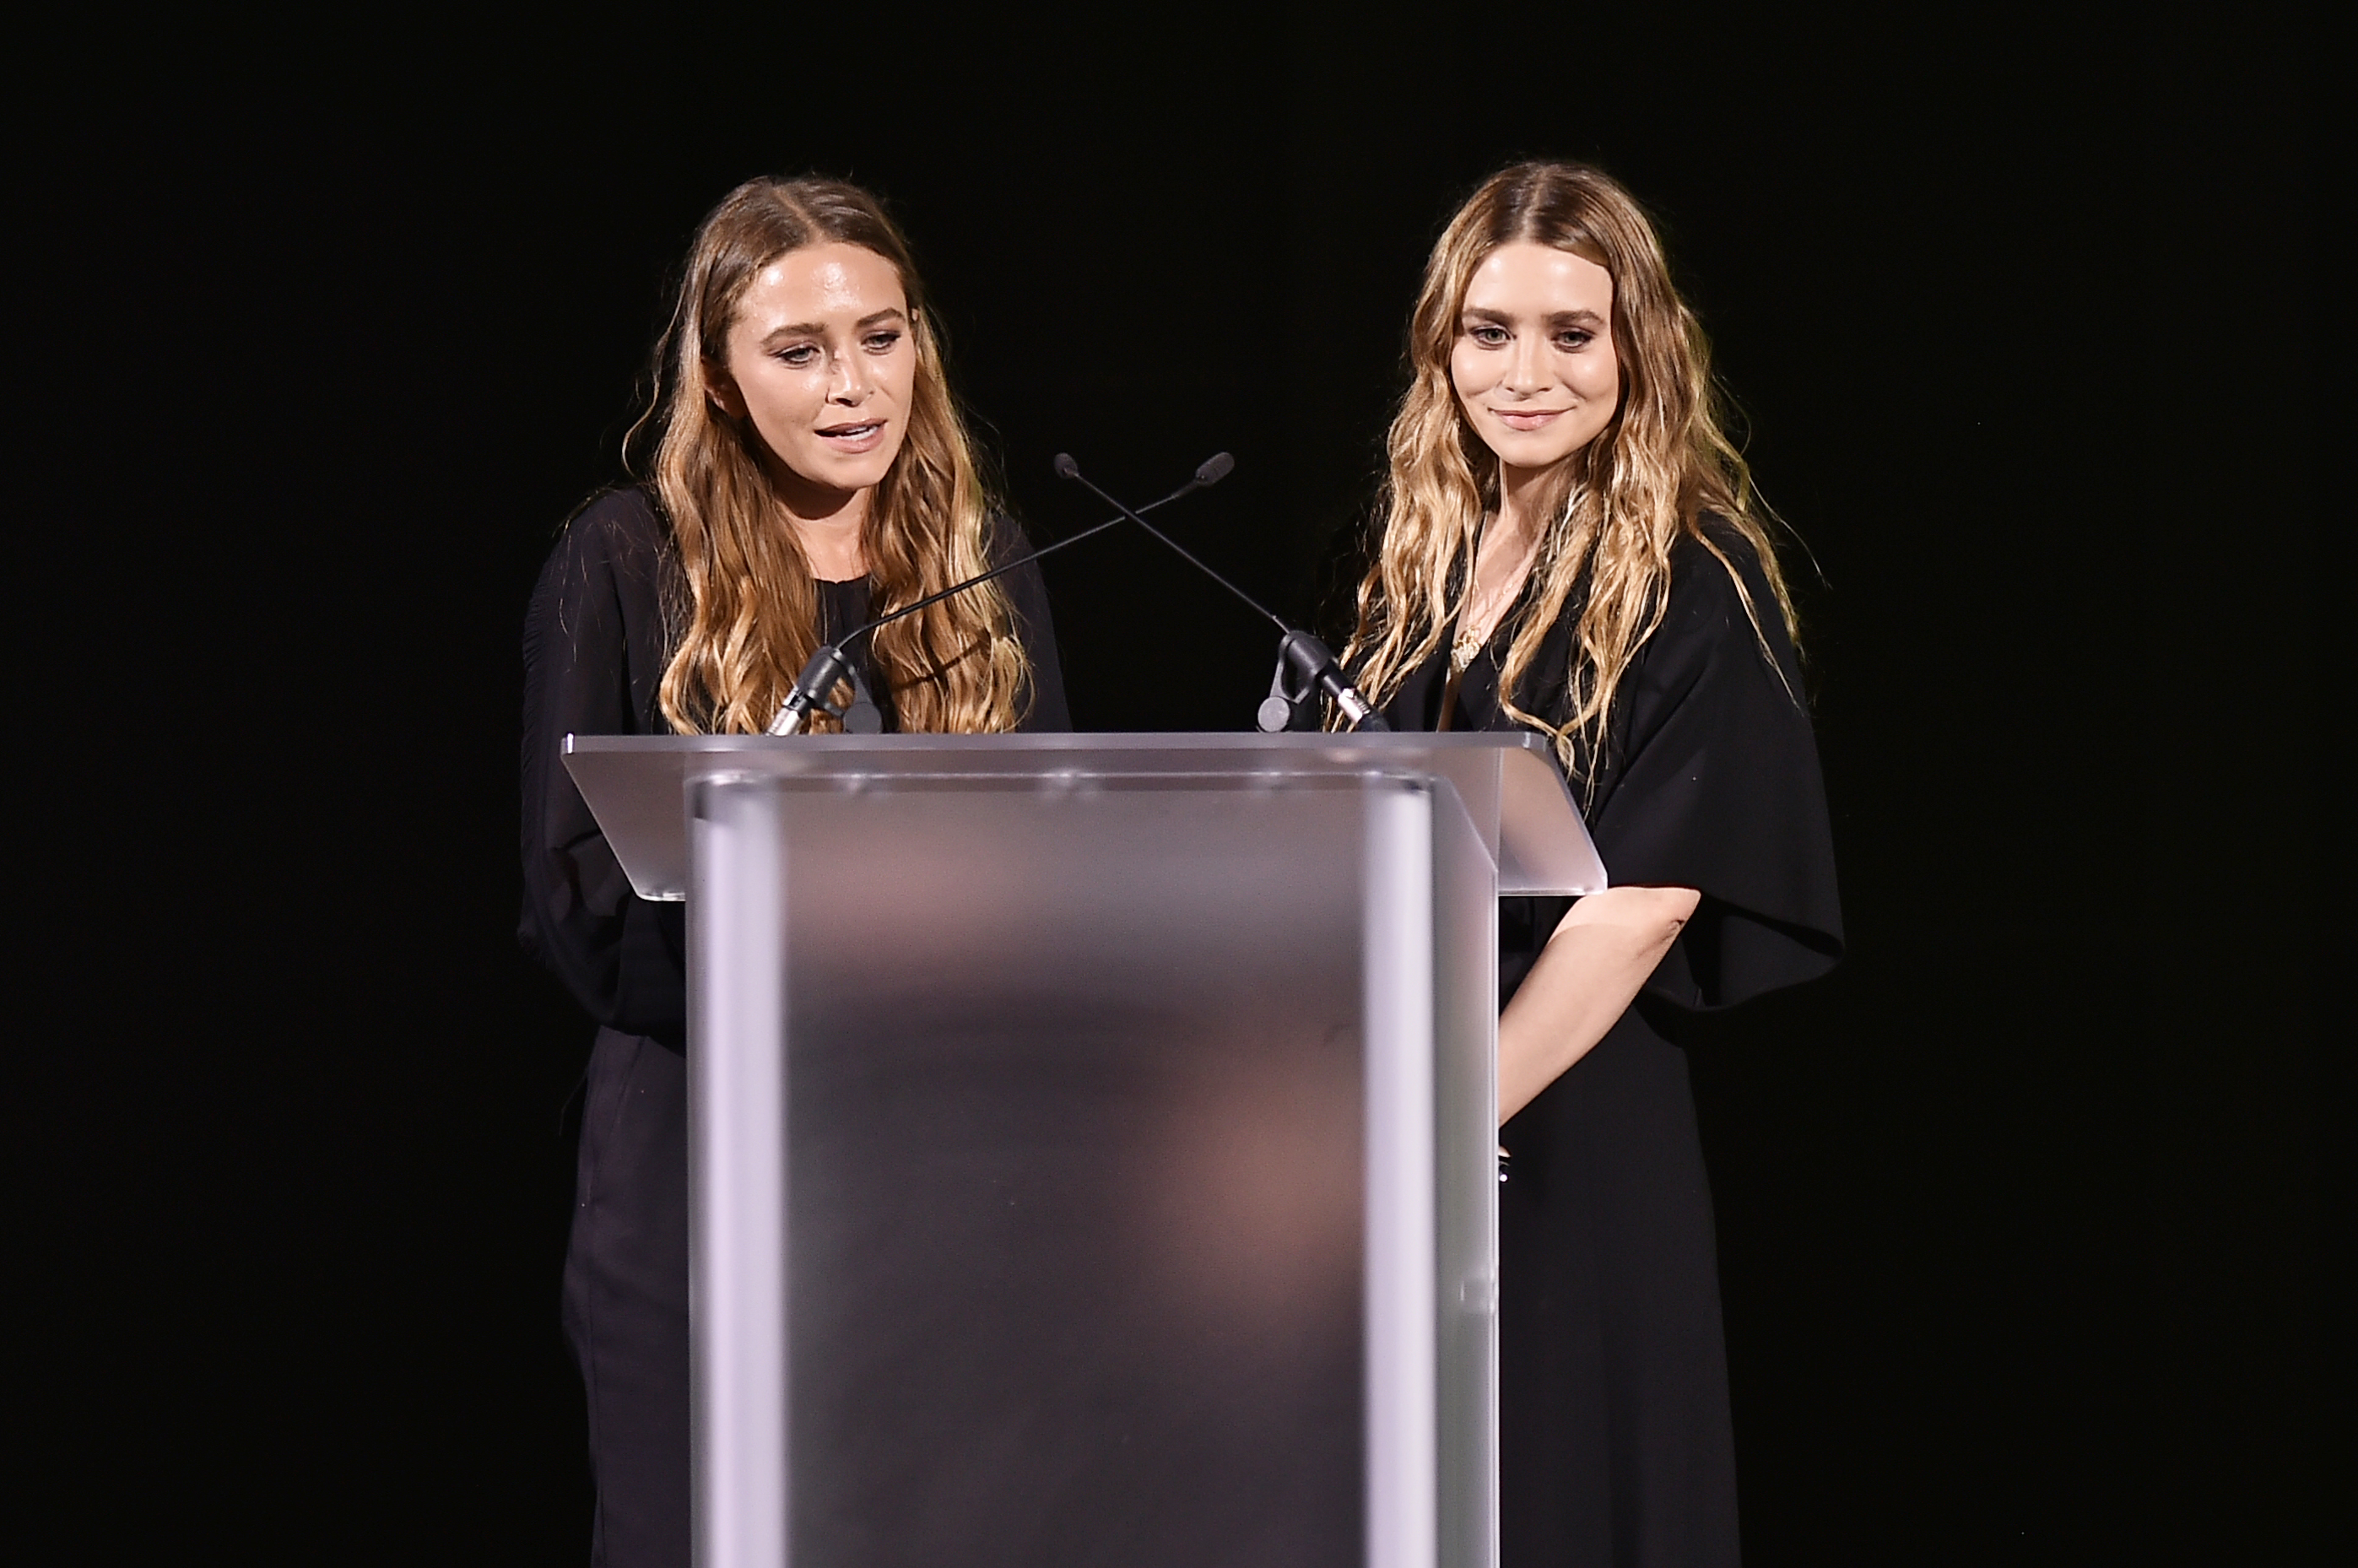 Mary-Kate and Ashley Olsen stand at a podium, dressed in black outfits, possibly delivering a speech or presentation